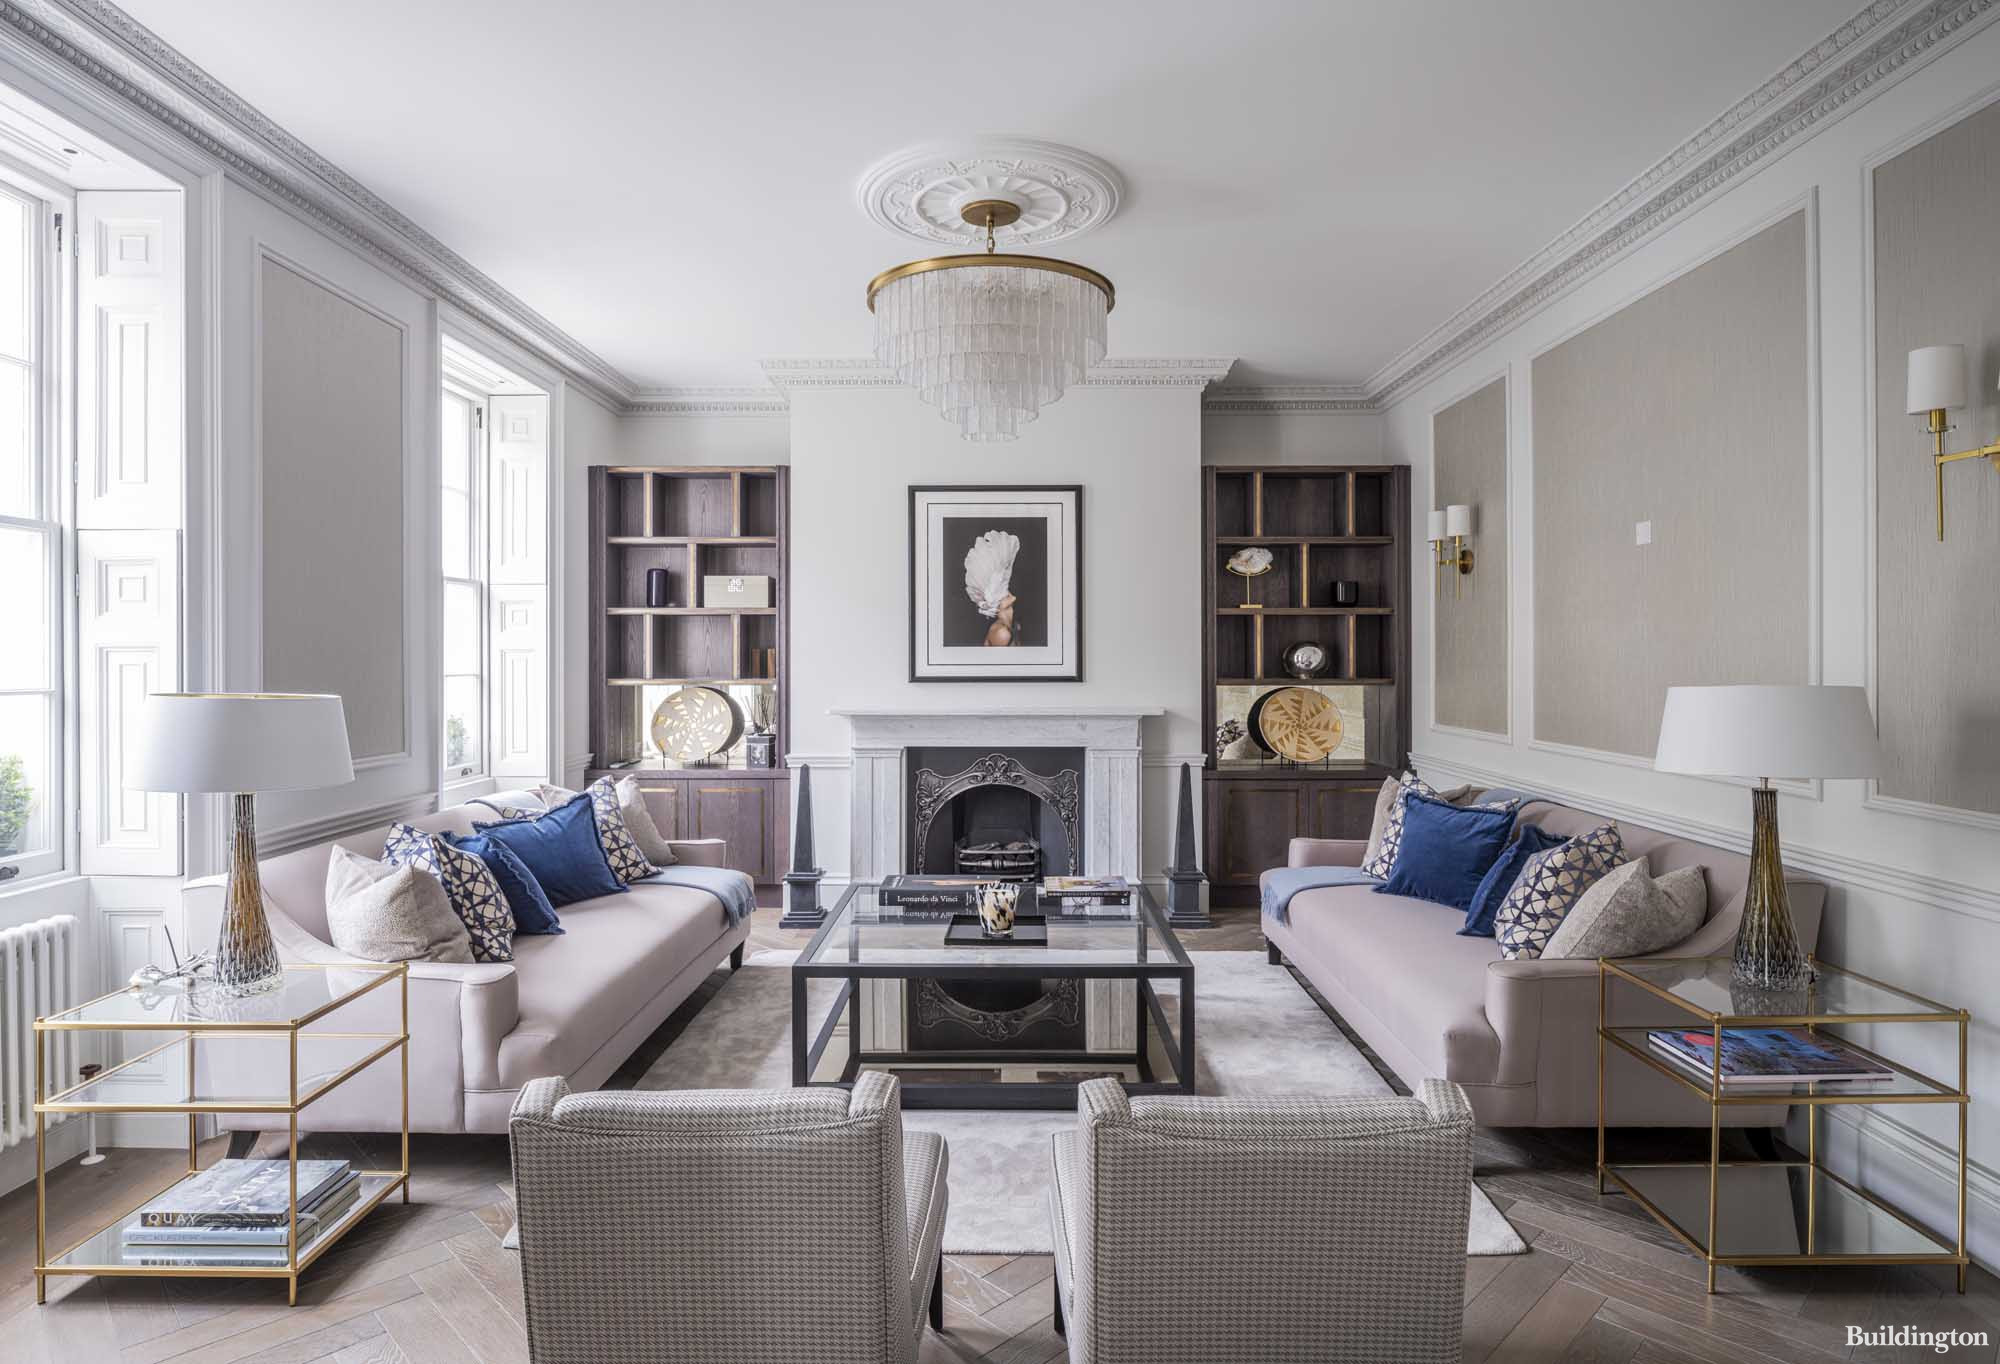 Living room at the Manchester Street townhouse for sale in Marylebone, London W1, via Aston Chase in 2023.